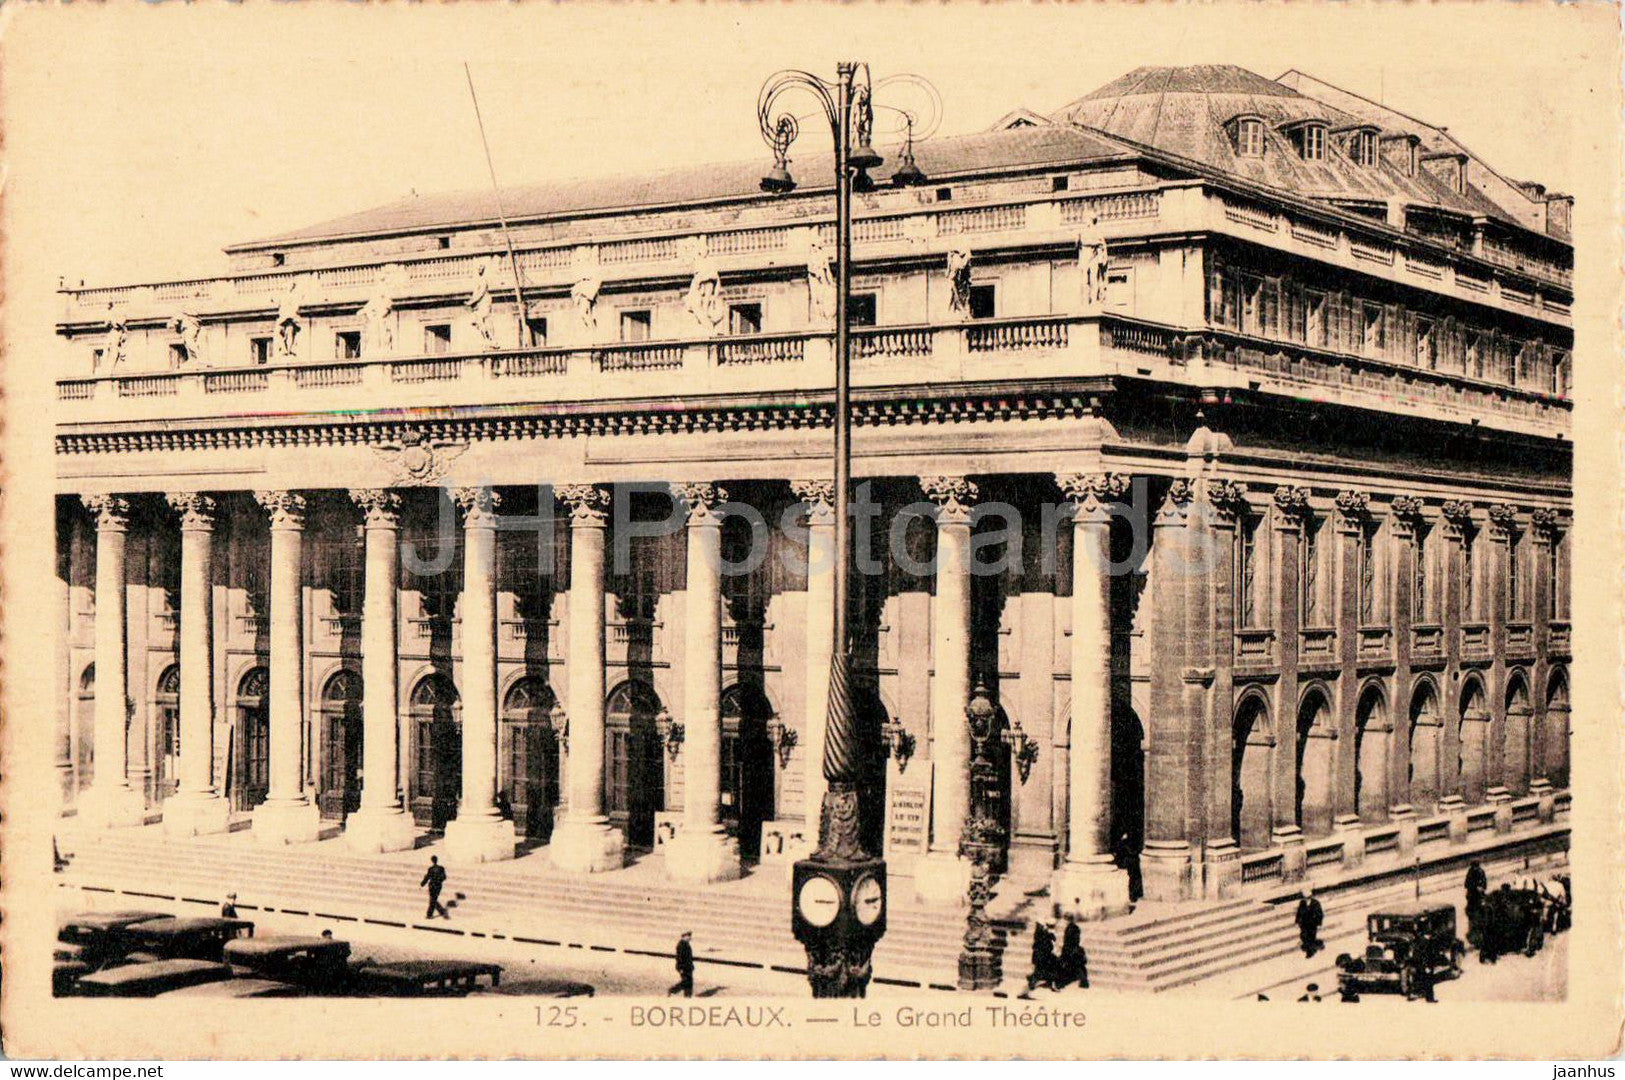 Bordeaux - Le Grand Theatre  - old car - 125 - old postcard - France - used - JH Postcards